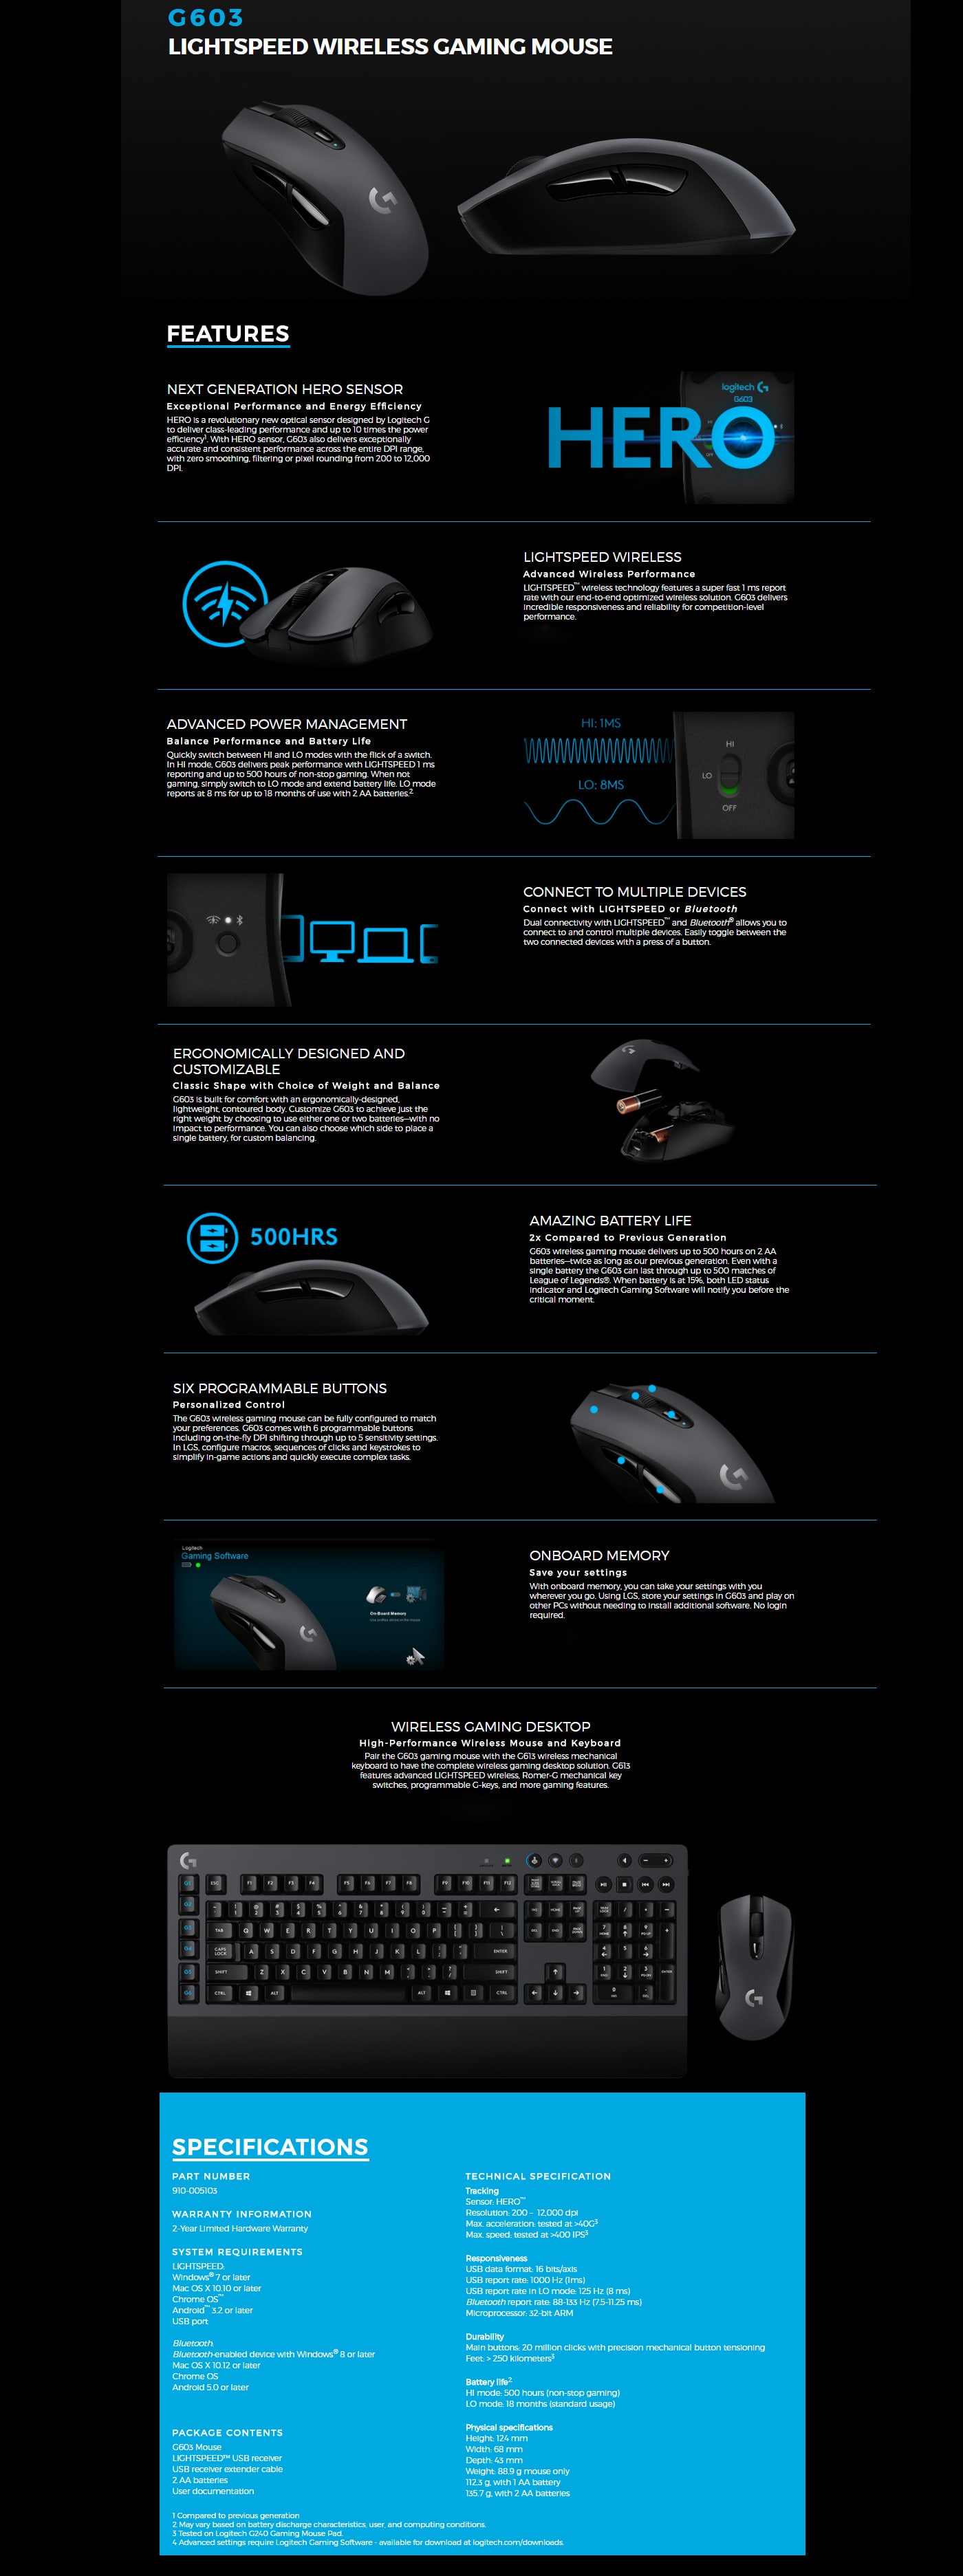 Logitech G603  Wireless Gaming Mouse features